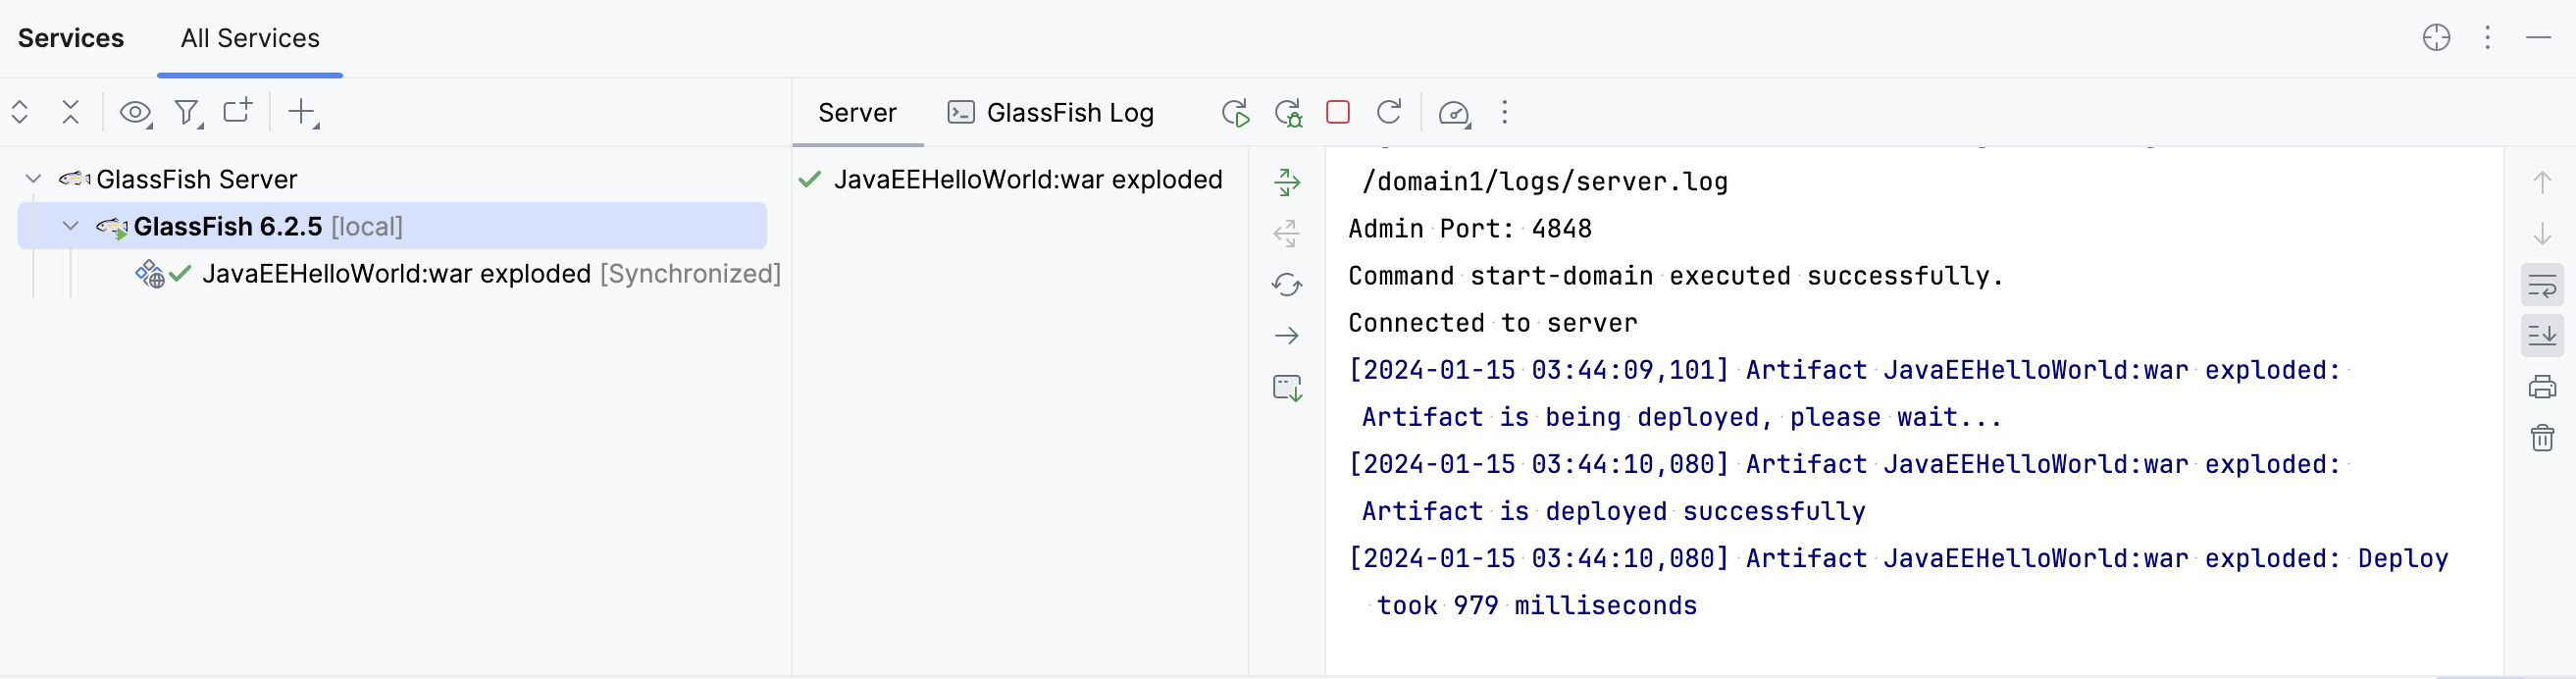 Started GlassFish server and deployed application in the Services tool window